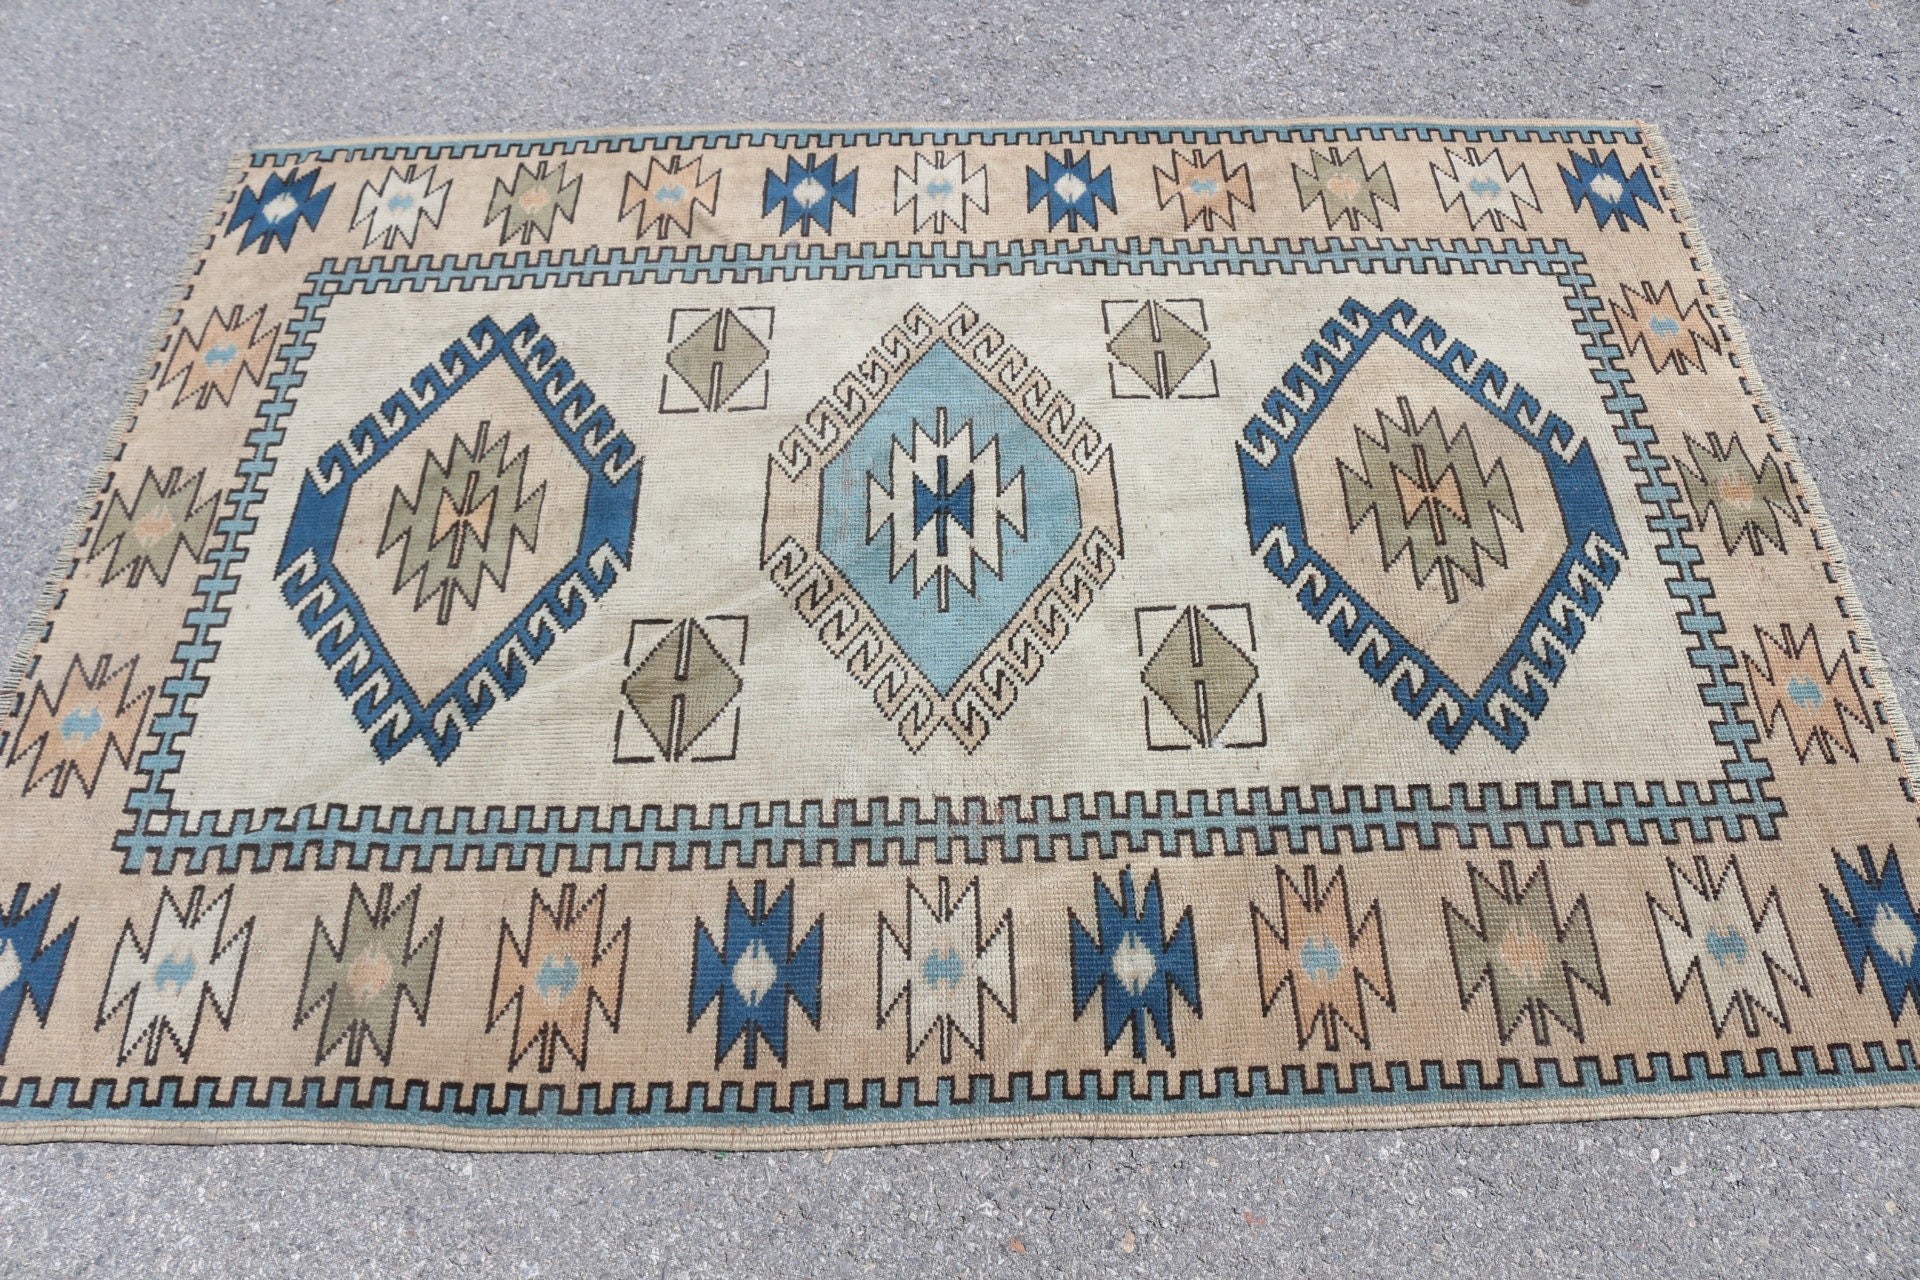 Rugs for Dining Room, Beige Anatolian Rug, 4.2x6 ft Area Rugs, Bedroom Rugs, Vintage Rug, Home Decor Rug, Kitchen Rugs, Turkish Rug